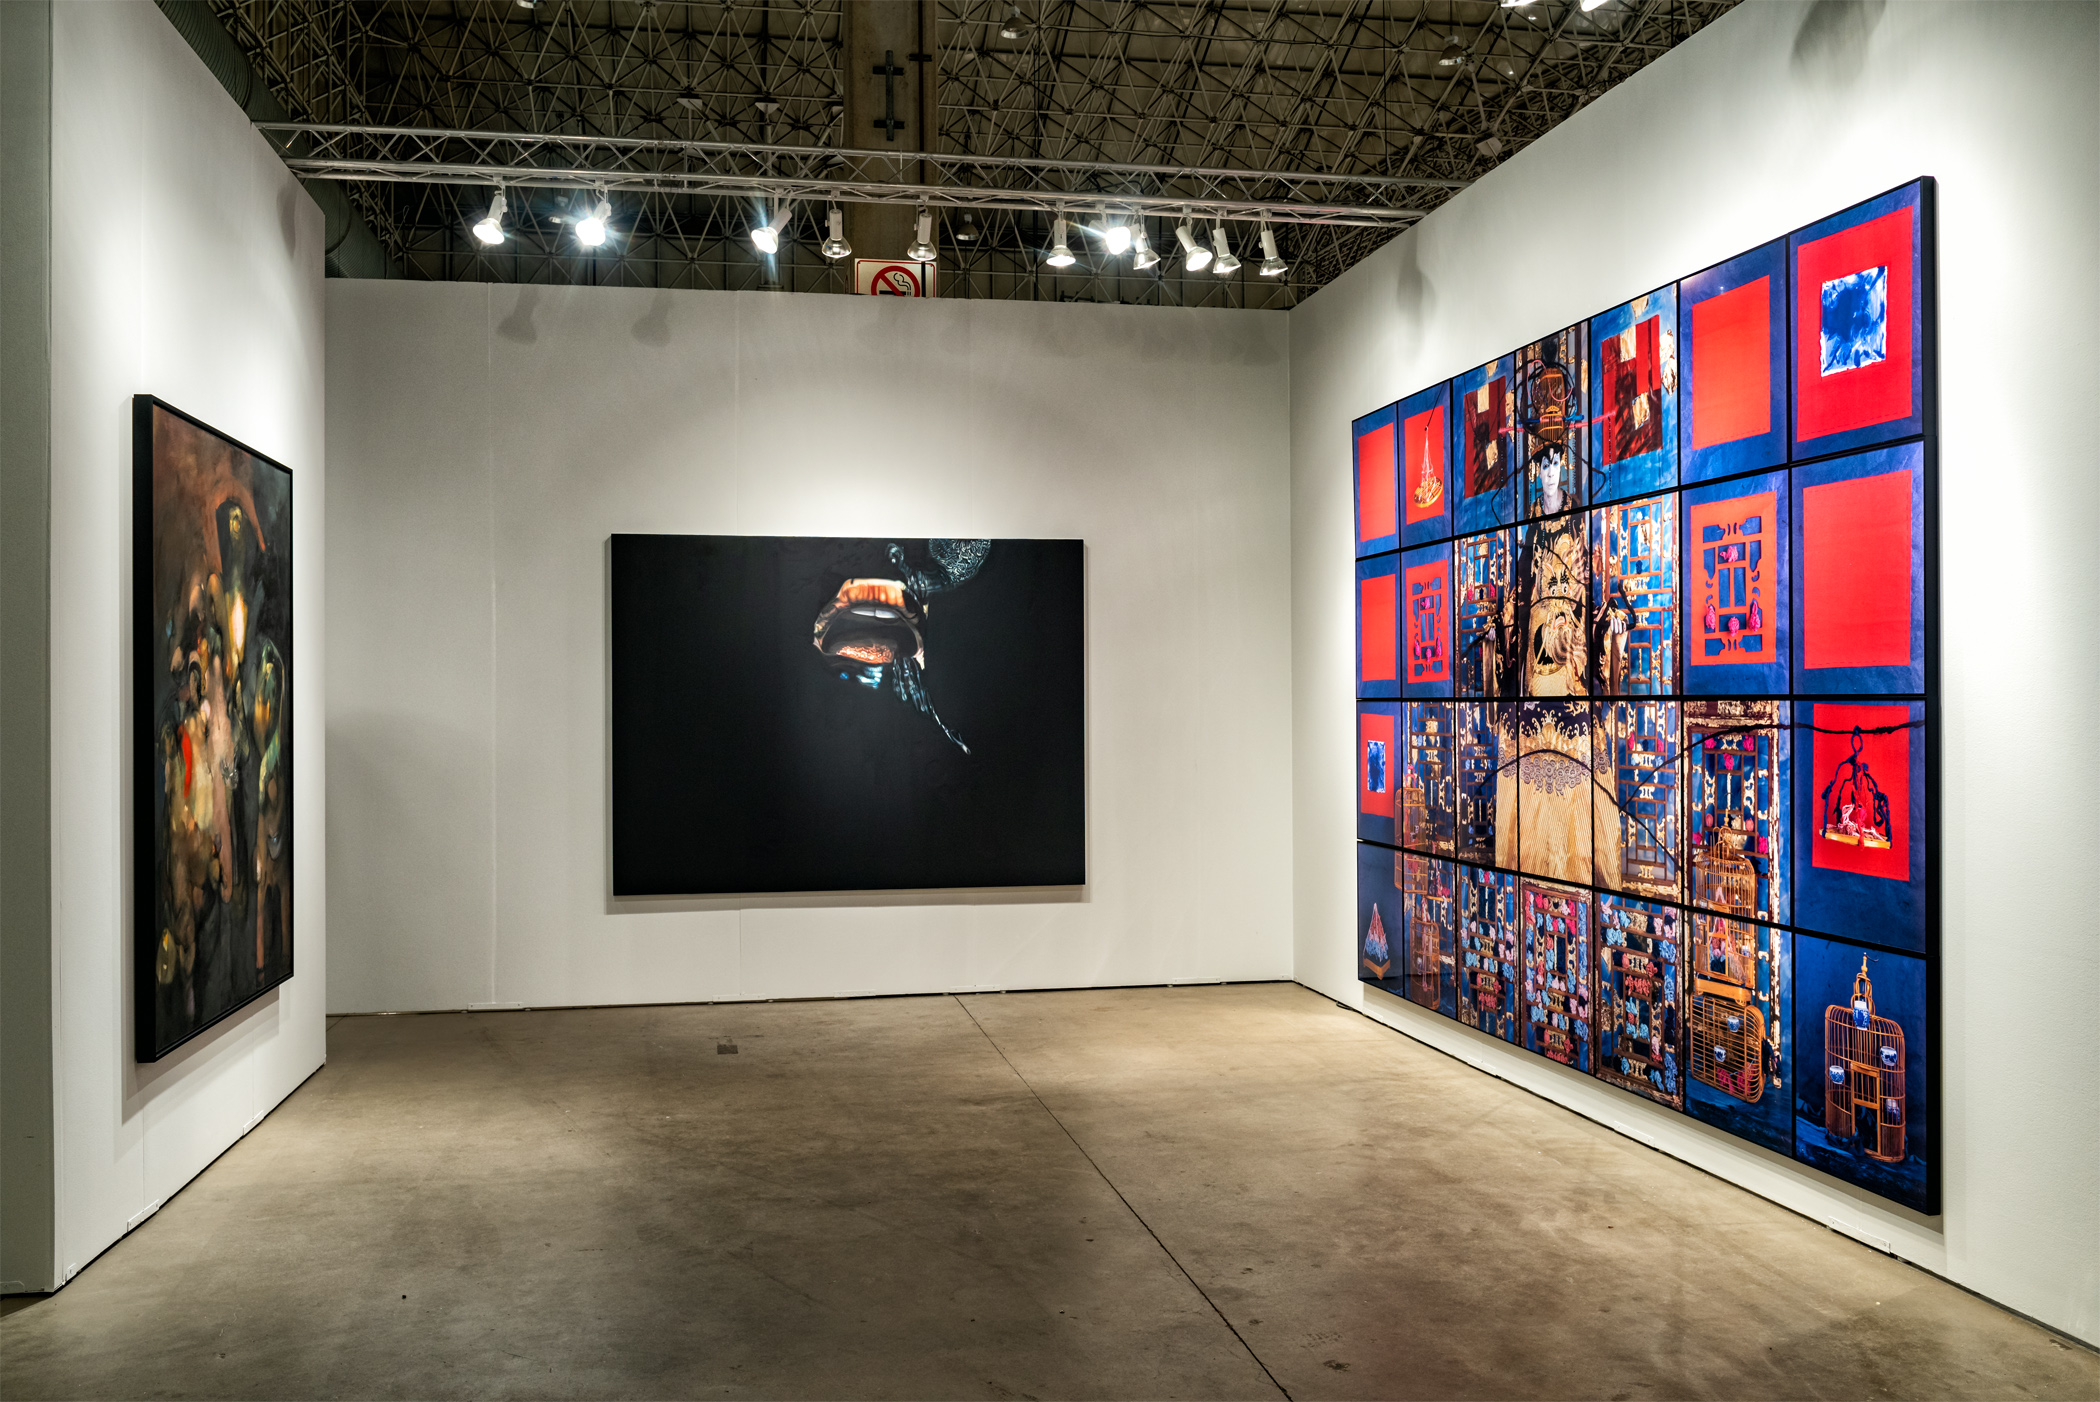   EXPO Chicago 2018,  installation view, Navy Pier, 600 E Grand Ave, Chicago, IL 60611, Booth 400, September 27 - 30, 2018 